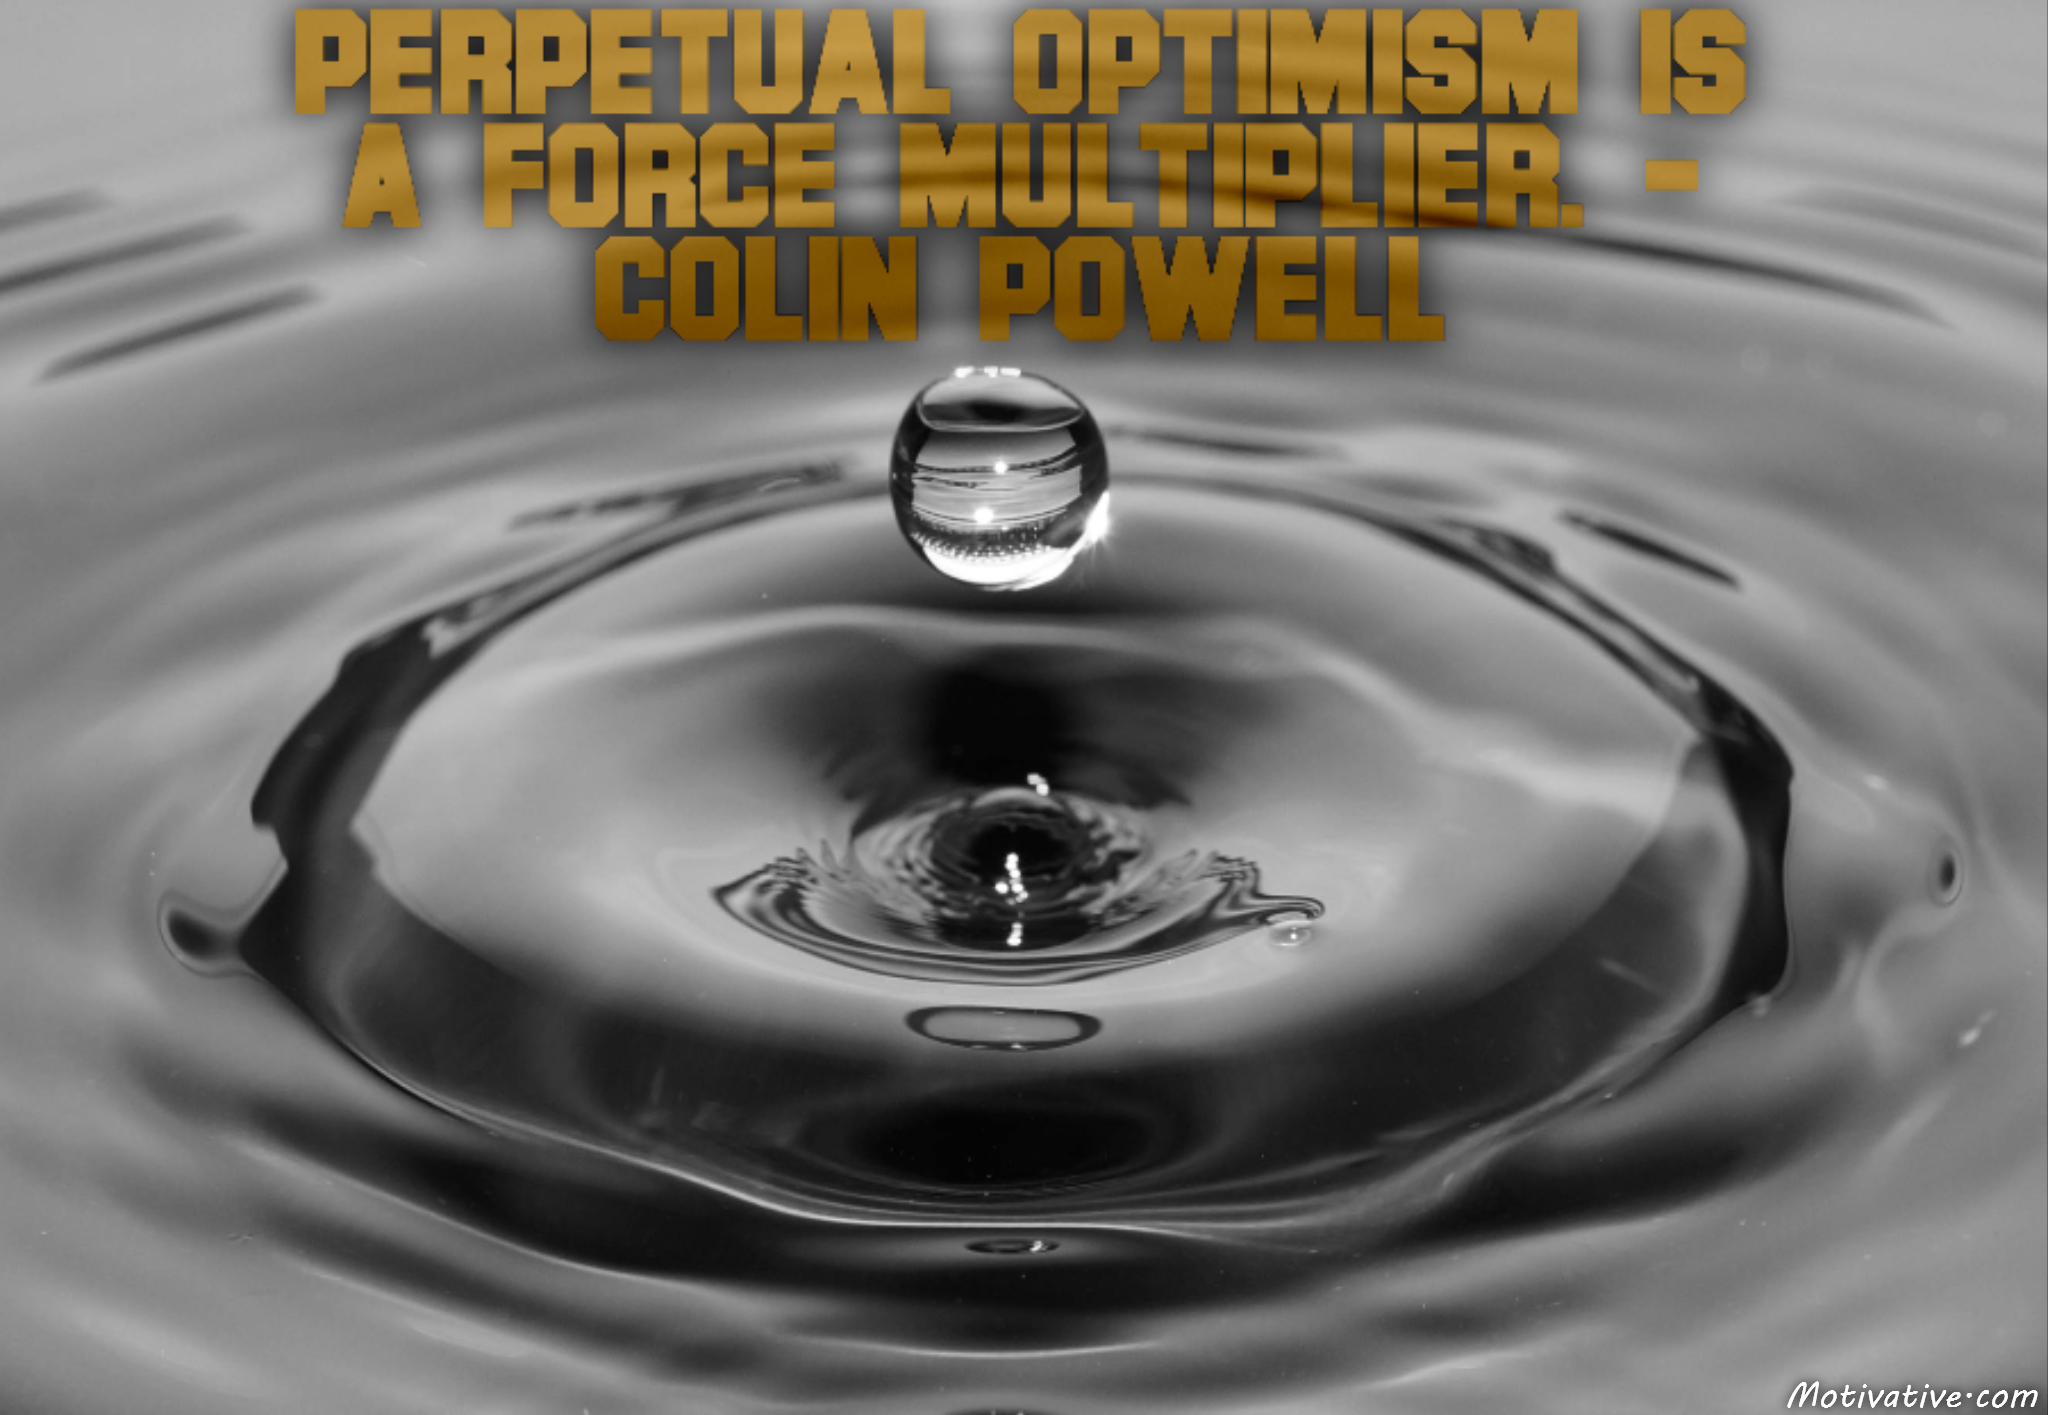 Perpetual optimism is a force multiplier. – Colin Powell